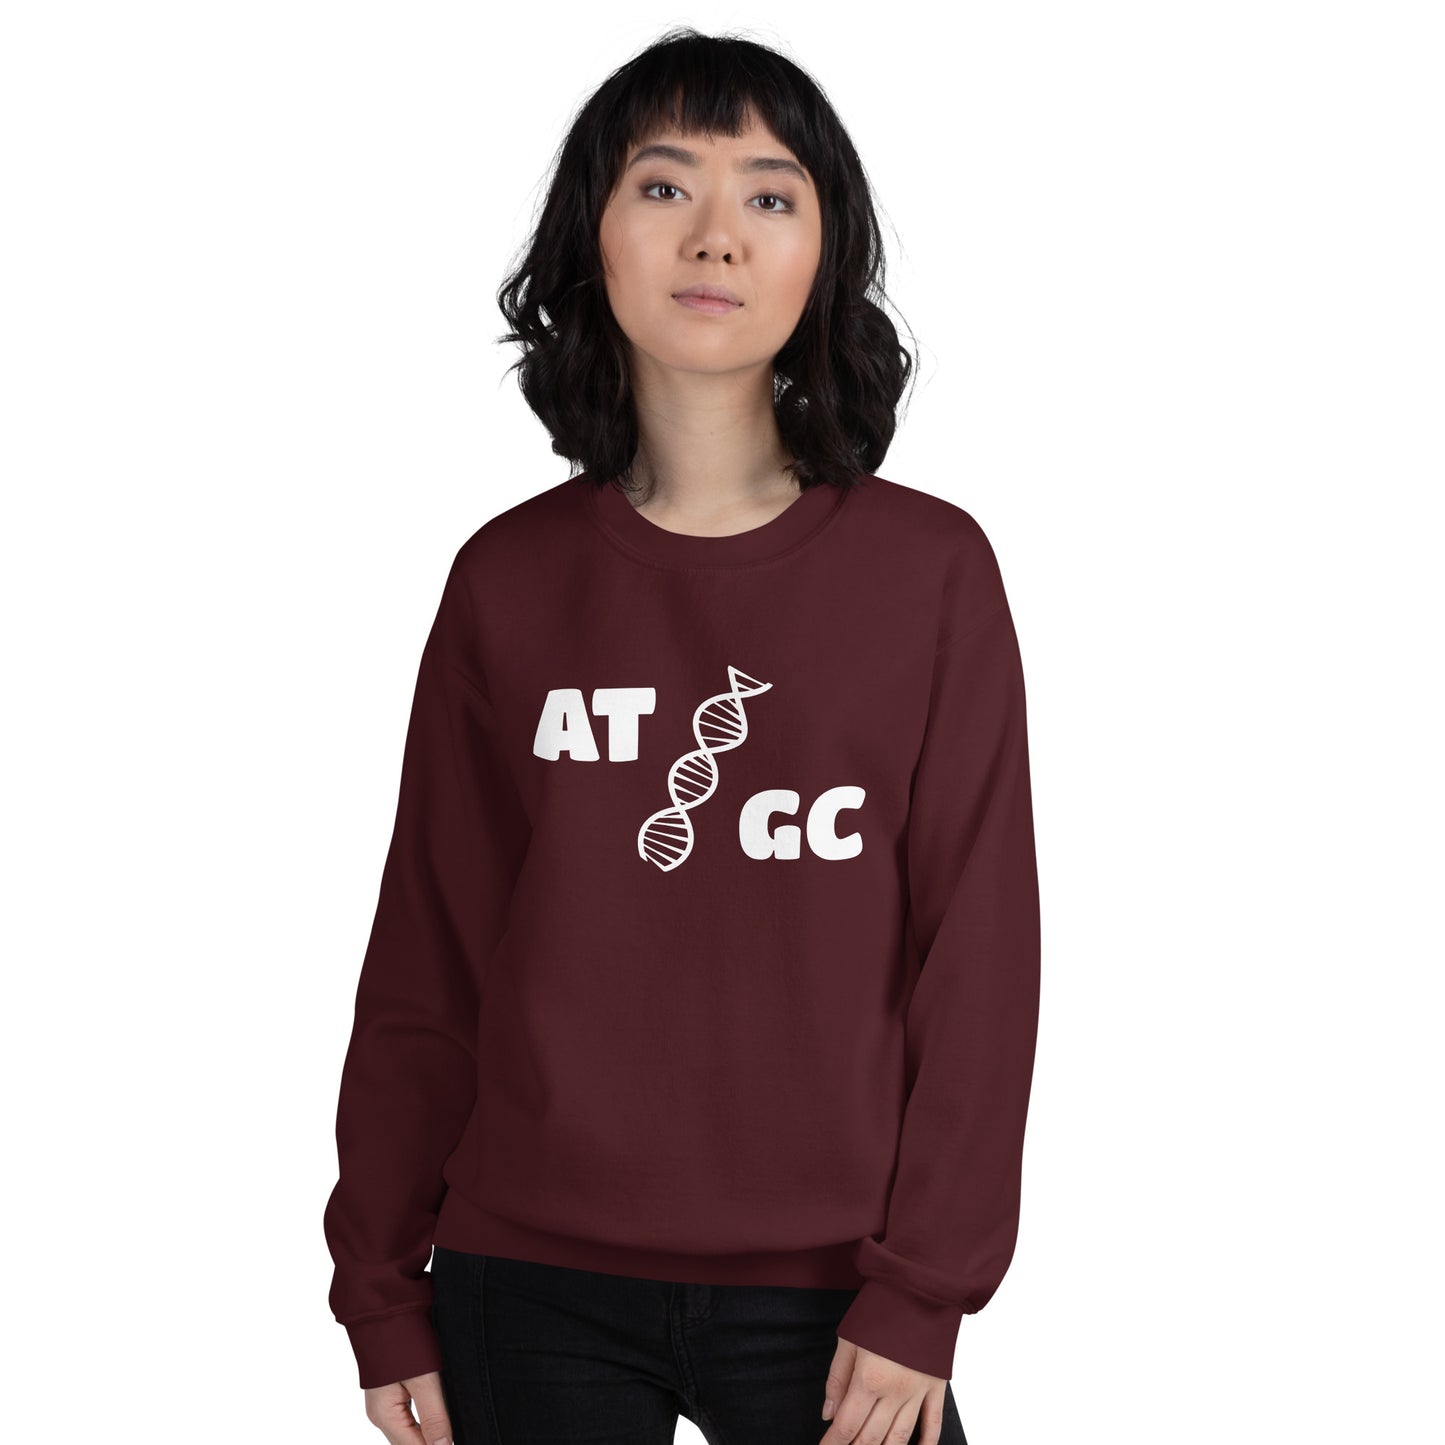 Women with maroon sweatshirt with image of a DNA string and the text "ATGC"